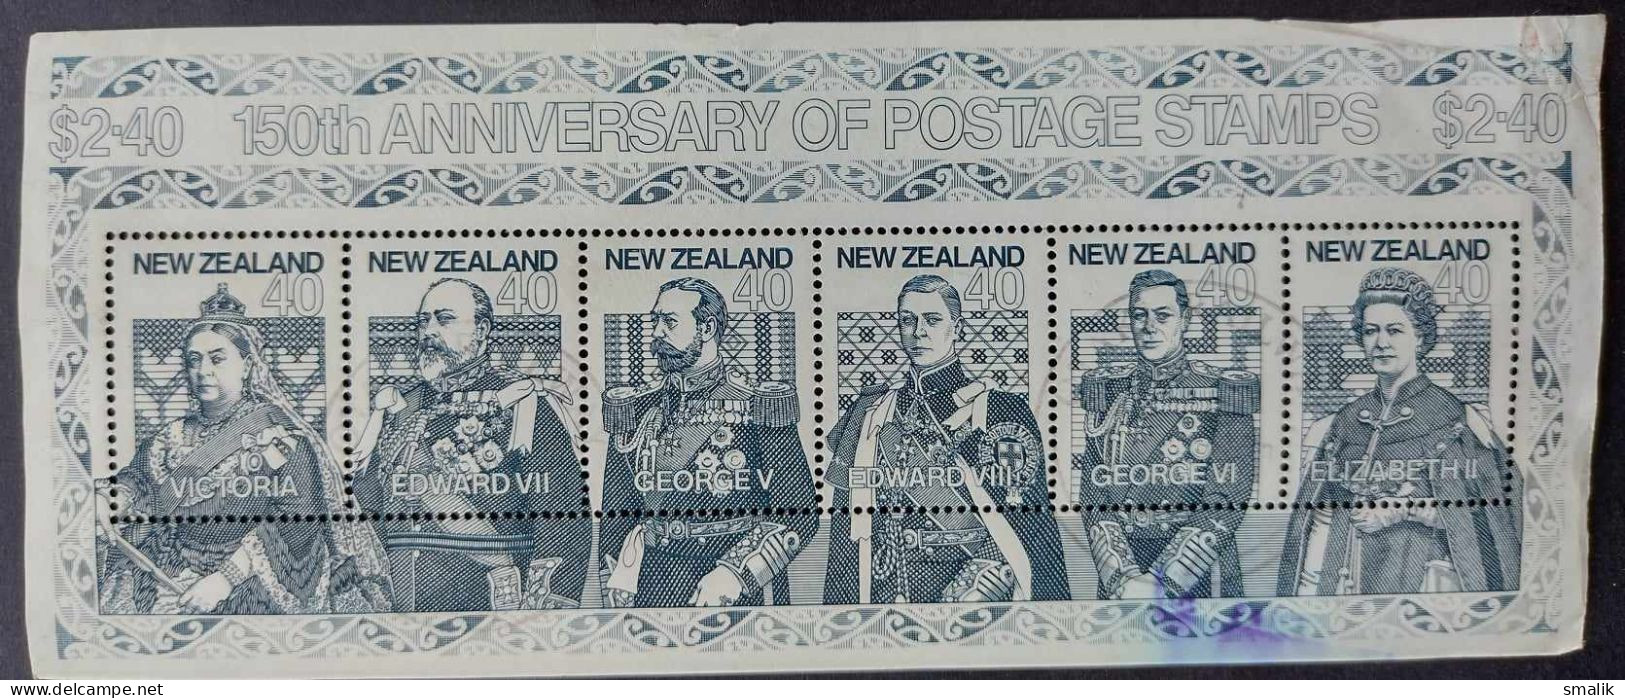 NEW ZEALAND 1990 - 150th Anniversary Of Postage Stamps, Victoria Edward George Elizabeth, Miniature Sheet, Good Used - Oblitérés